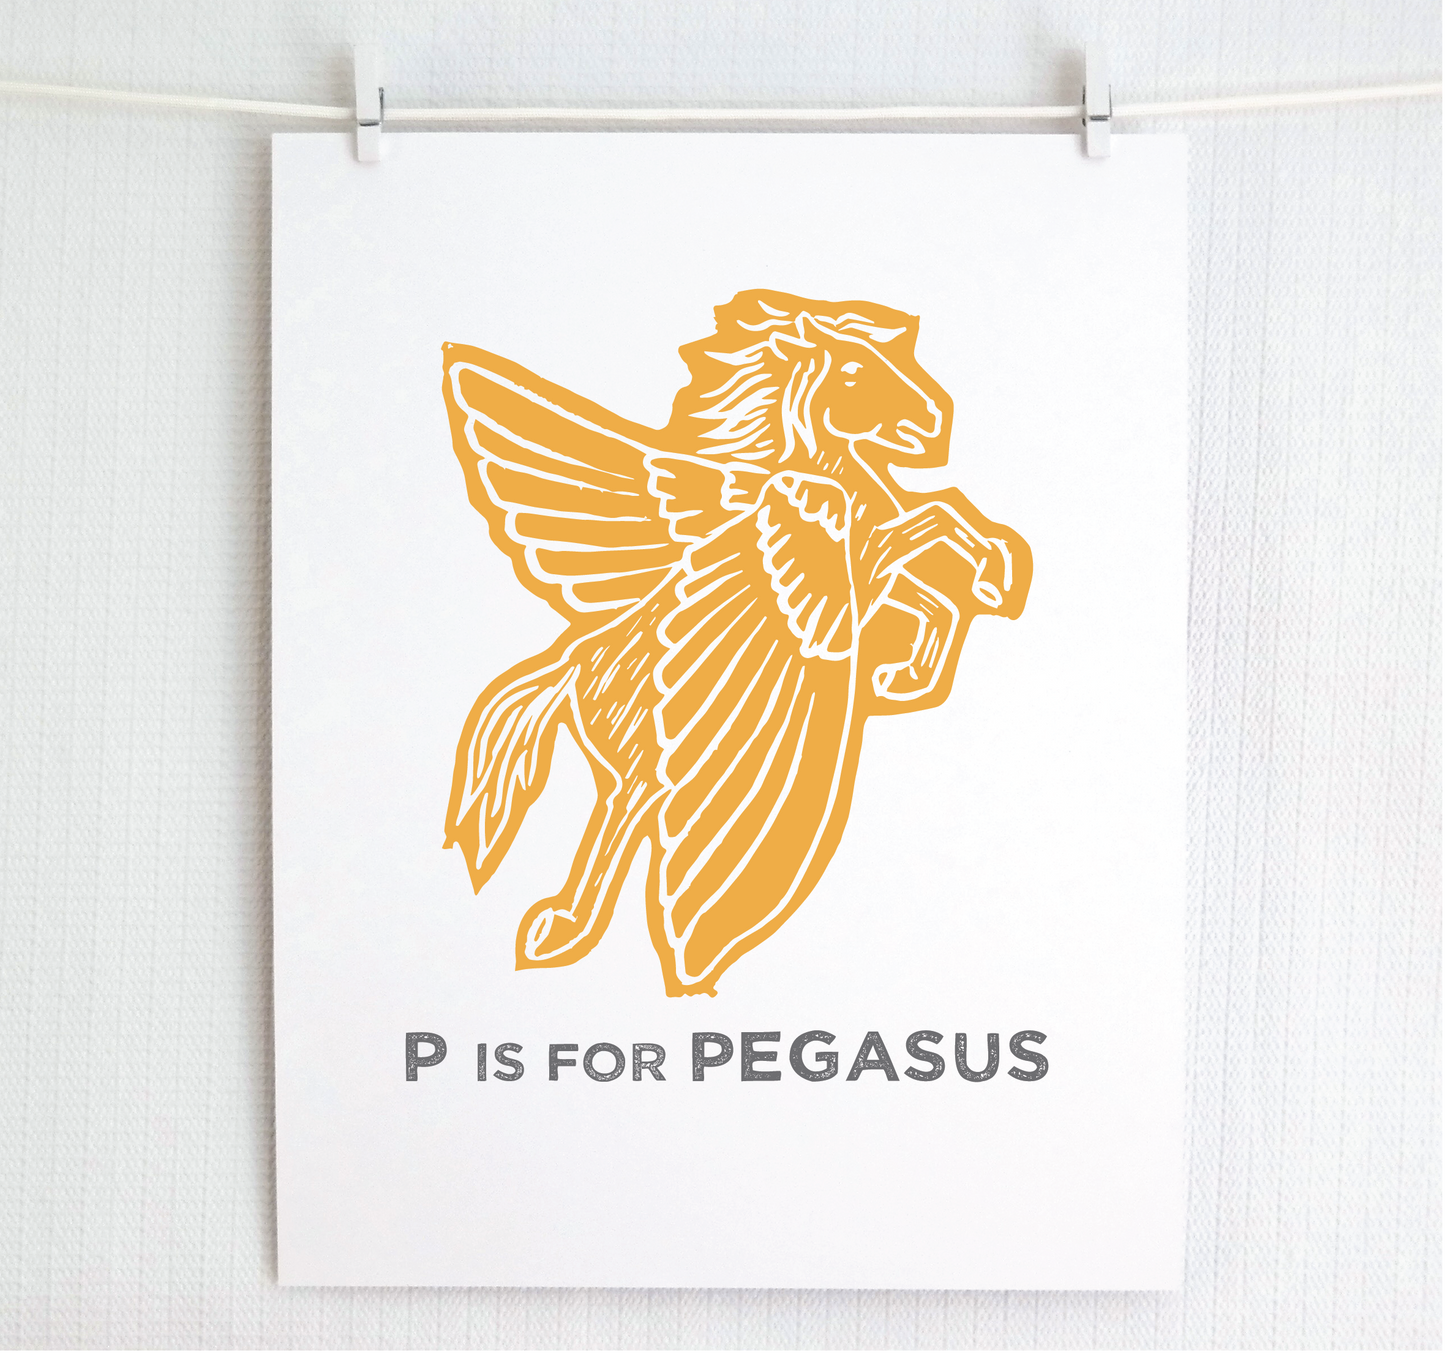 P is for Pegasus